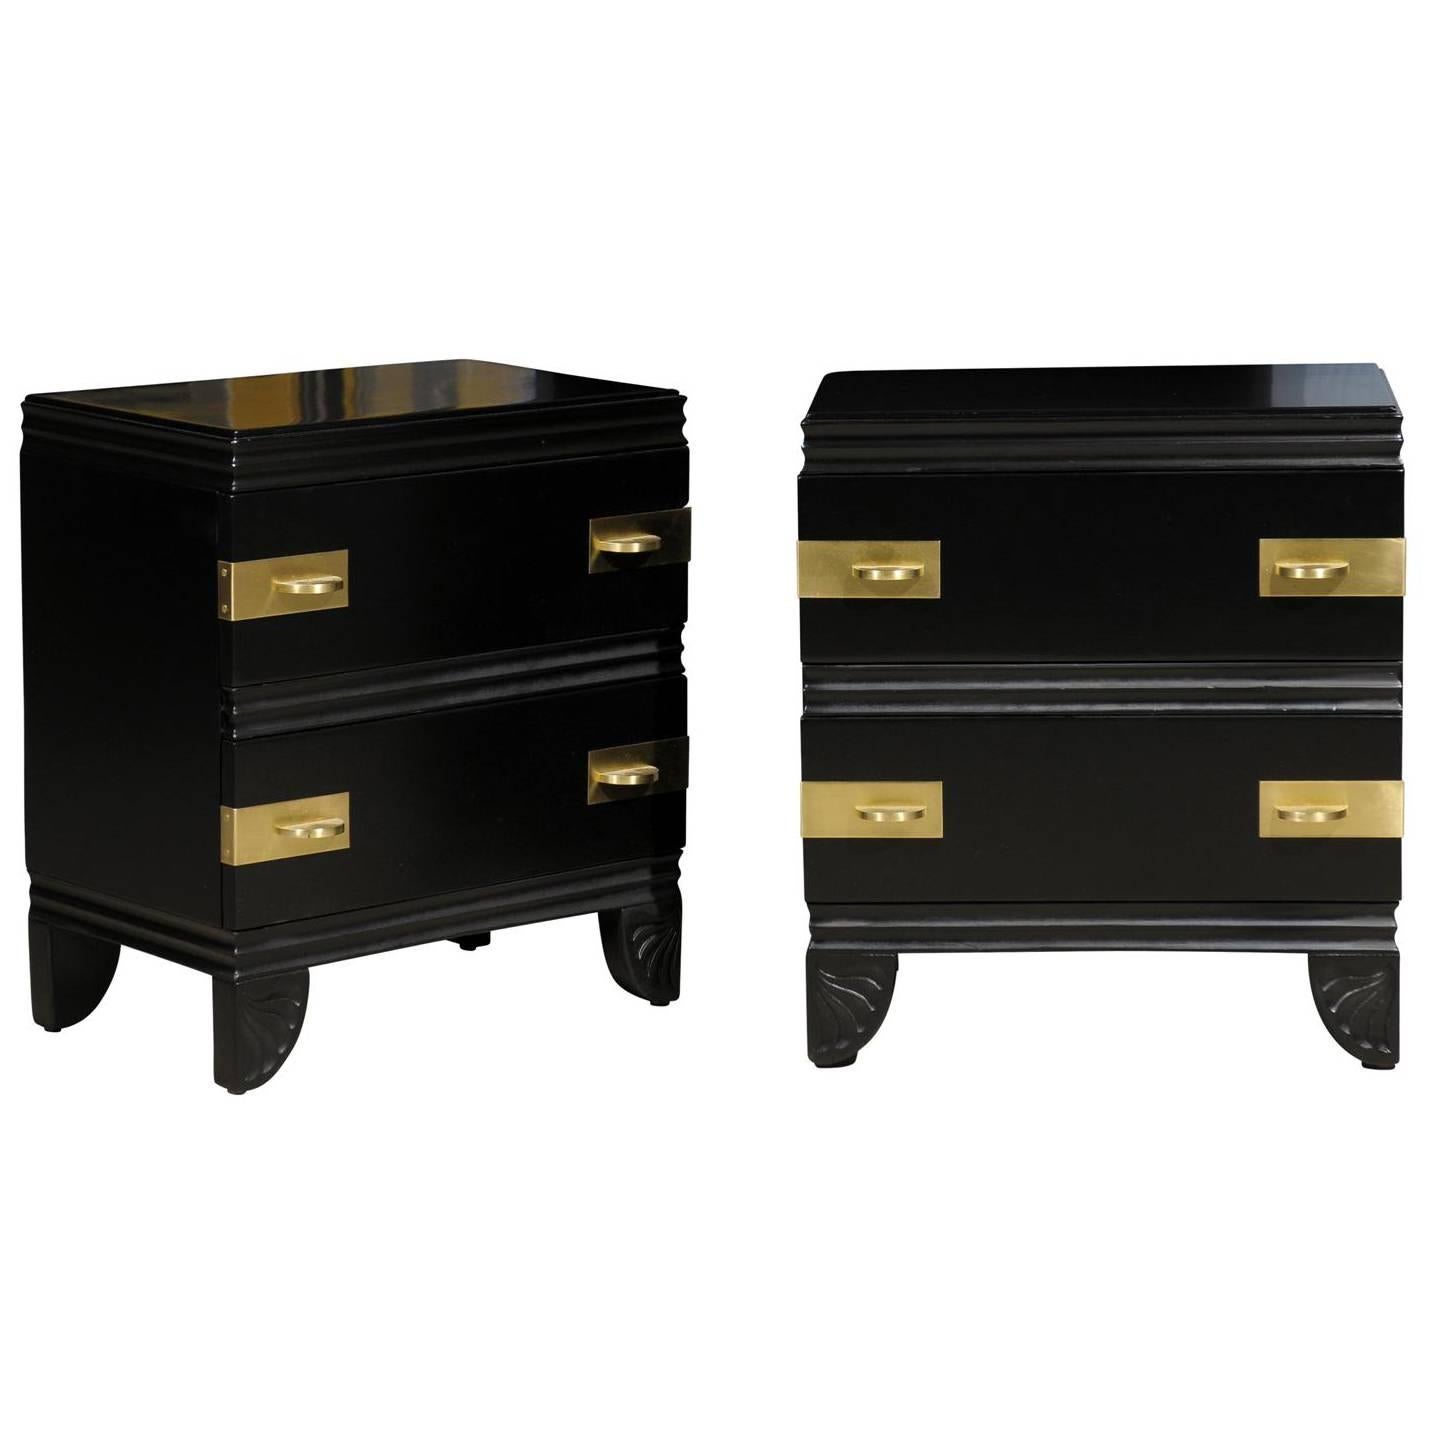 Rare Pair of Widdicomb End Tables or Nightstands Restored in Black Lacquer